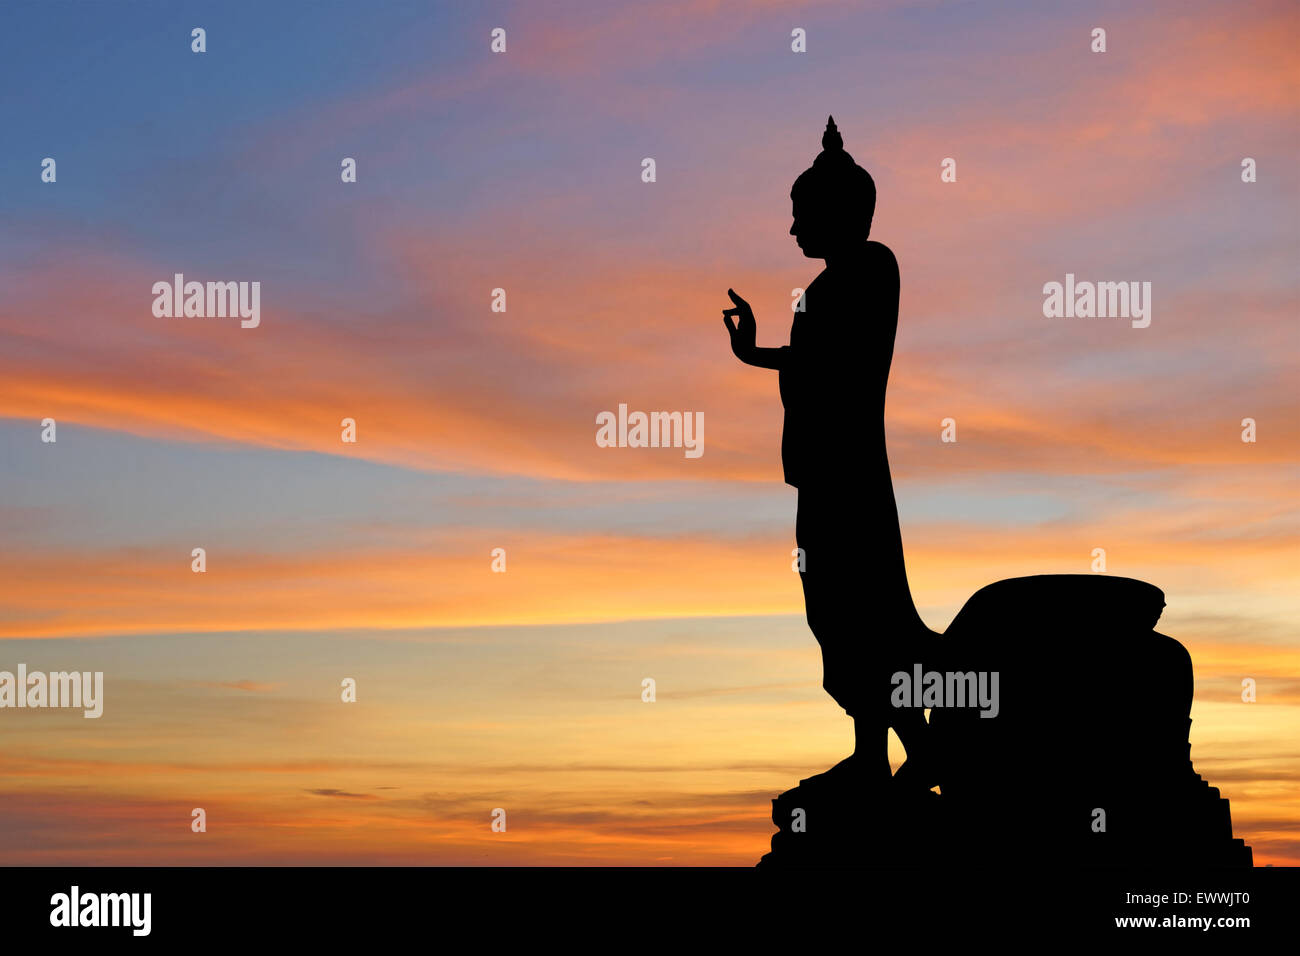 silhouette of  buddha image with beautiful sky background Stock Photo